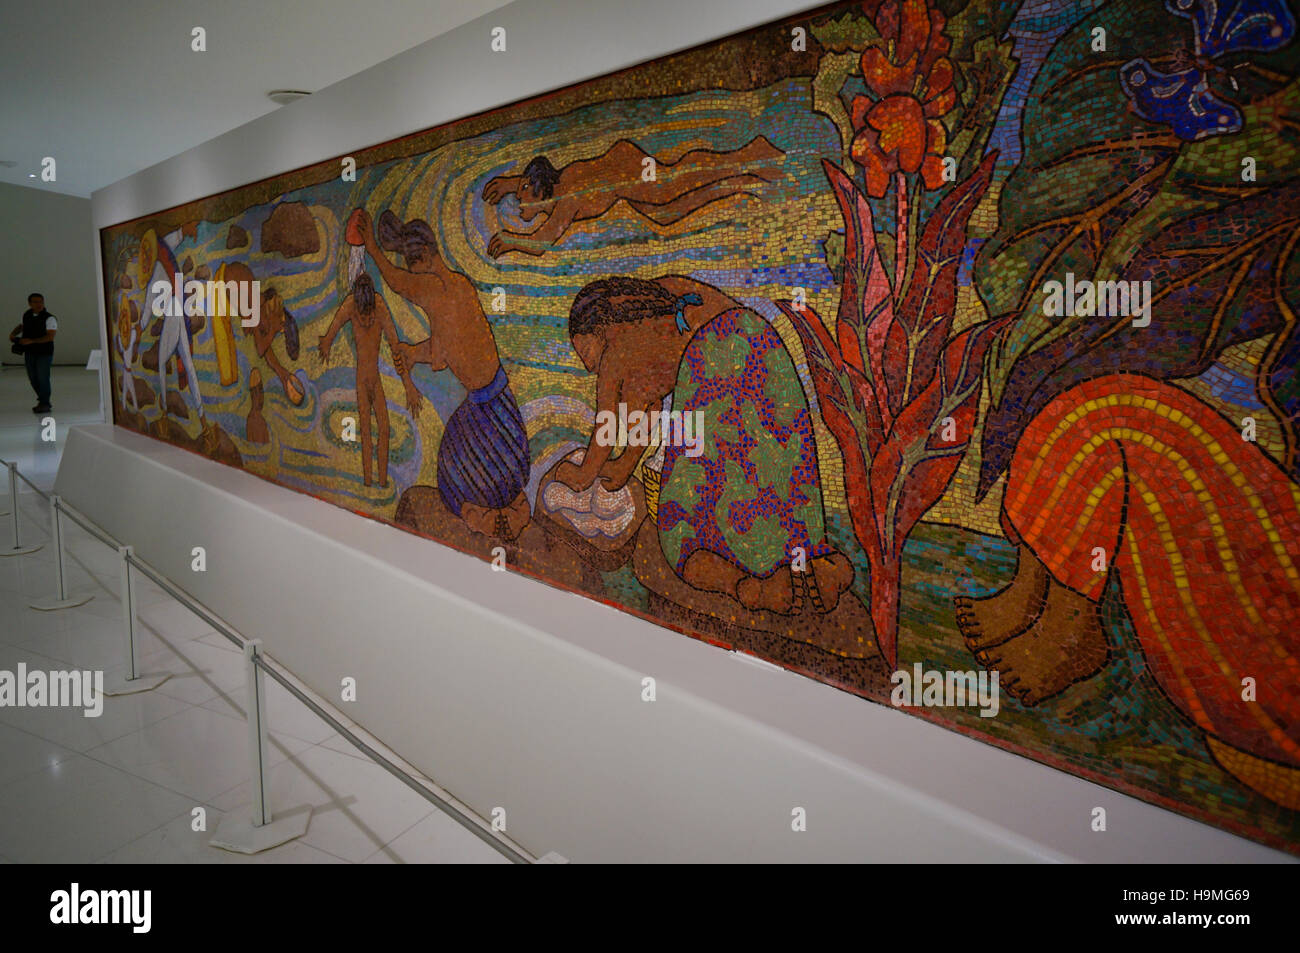 Diego Rivera mosaic, Bath in the River' or 'Juchitan River' or 'Bath of Tehuantepec', in the Soumaya Museum in Mexico City, Mexico Stock Photo